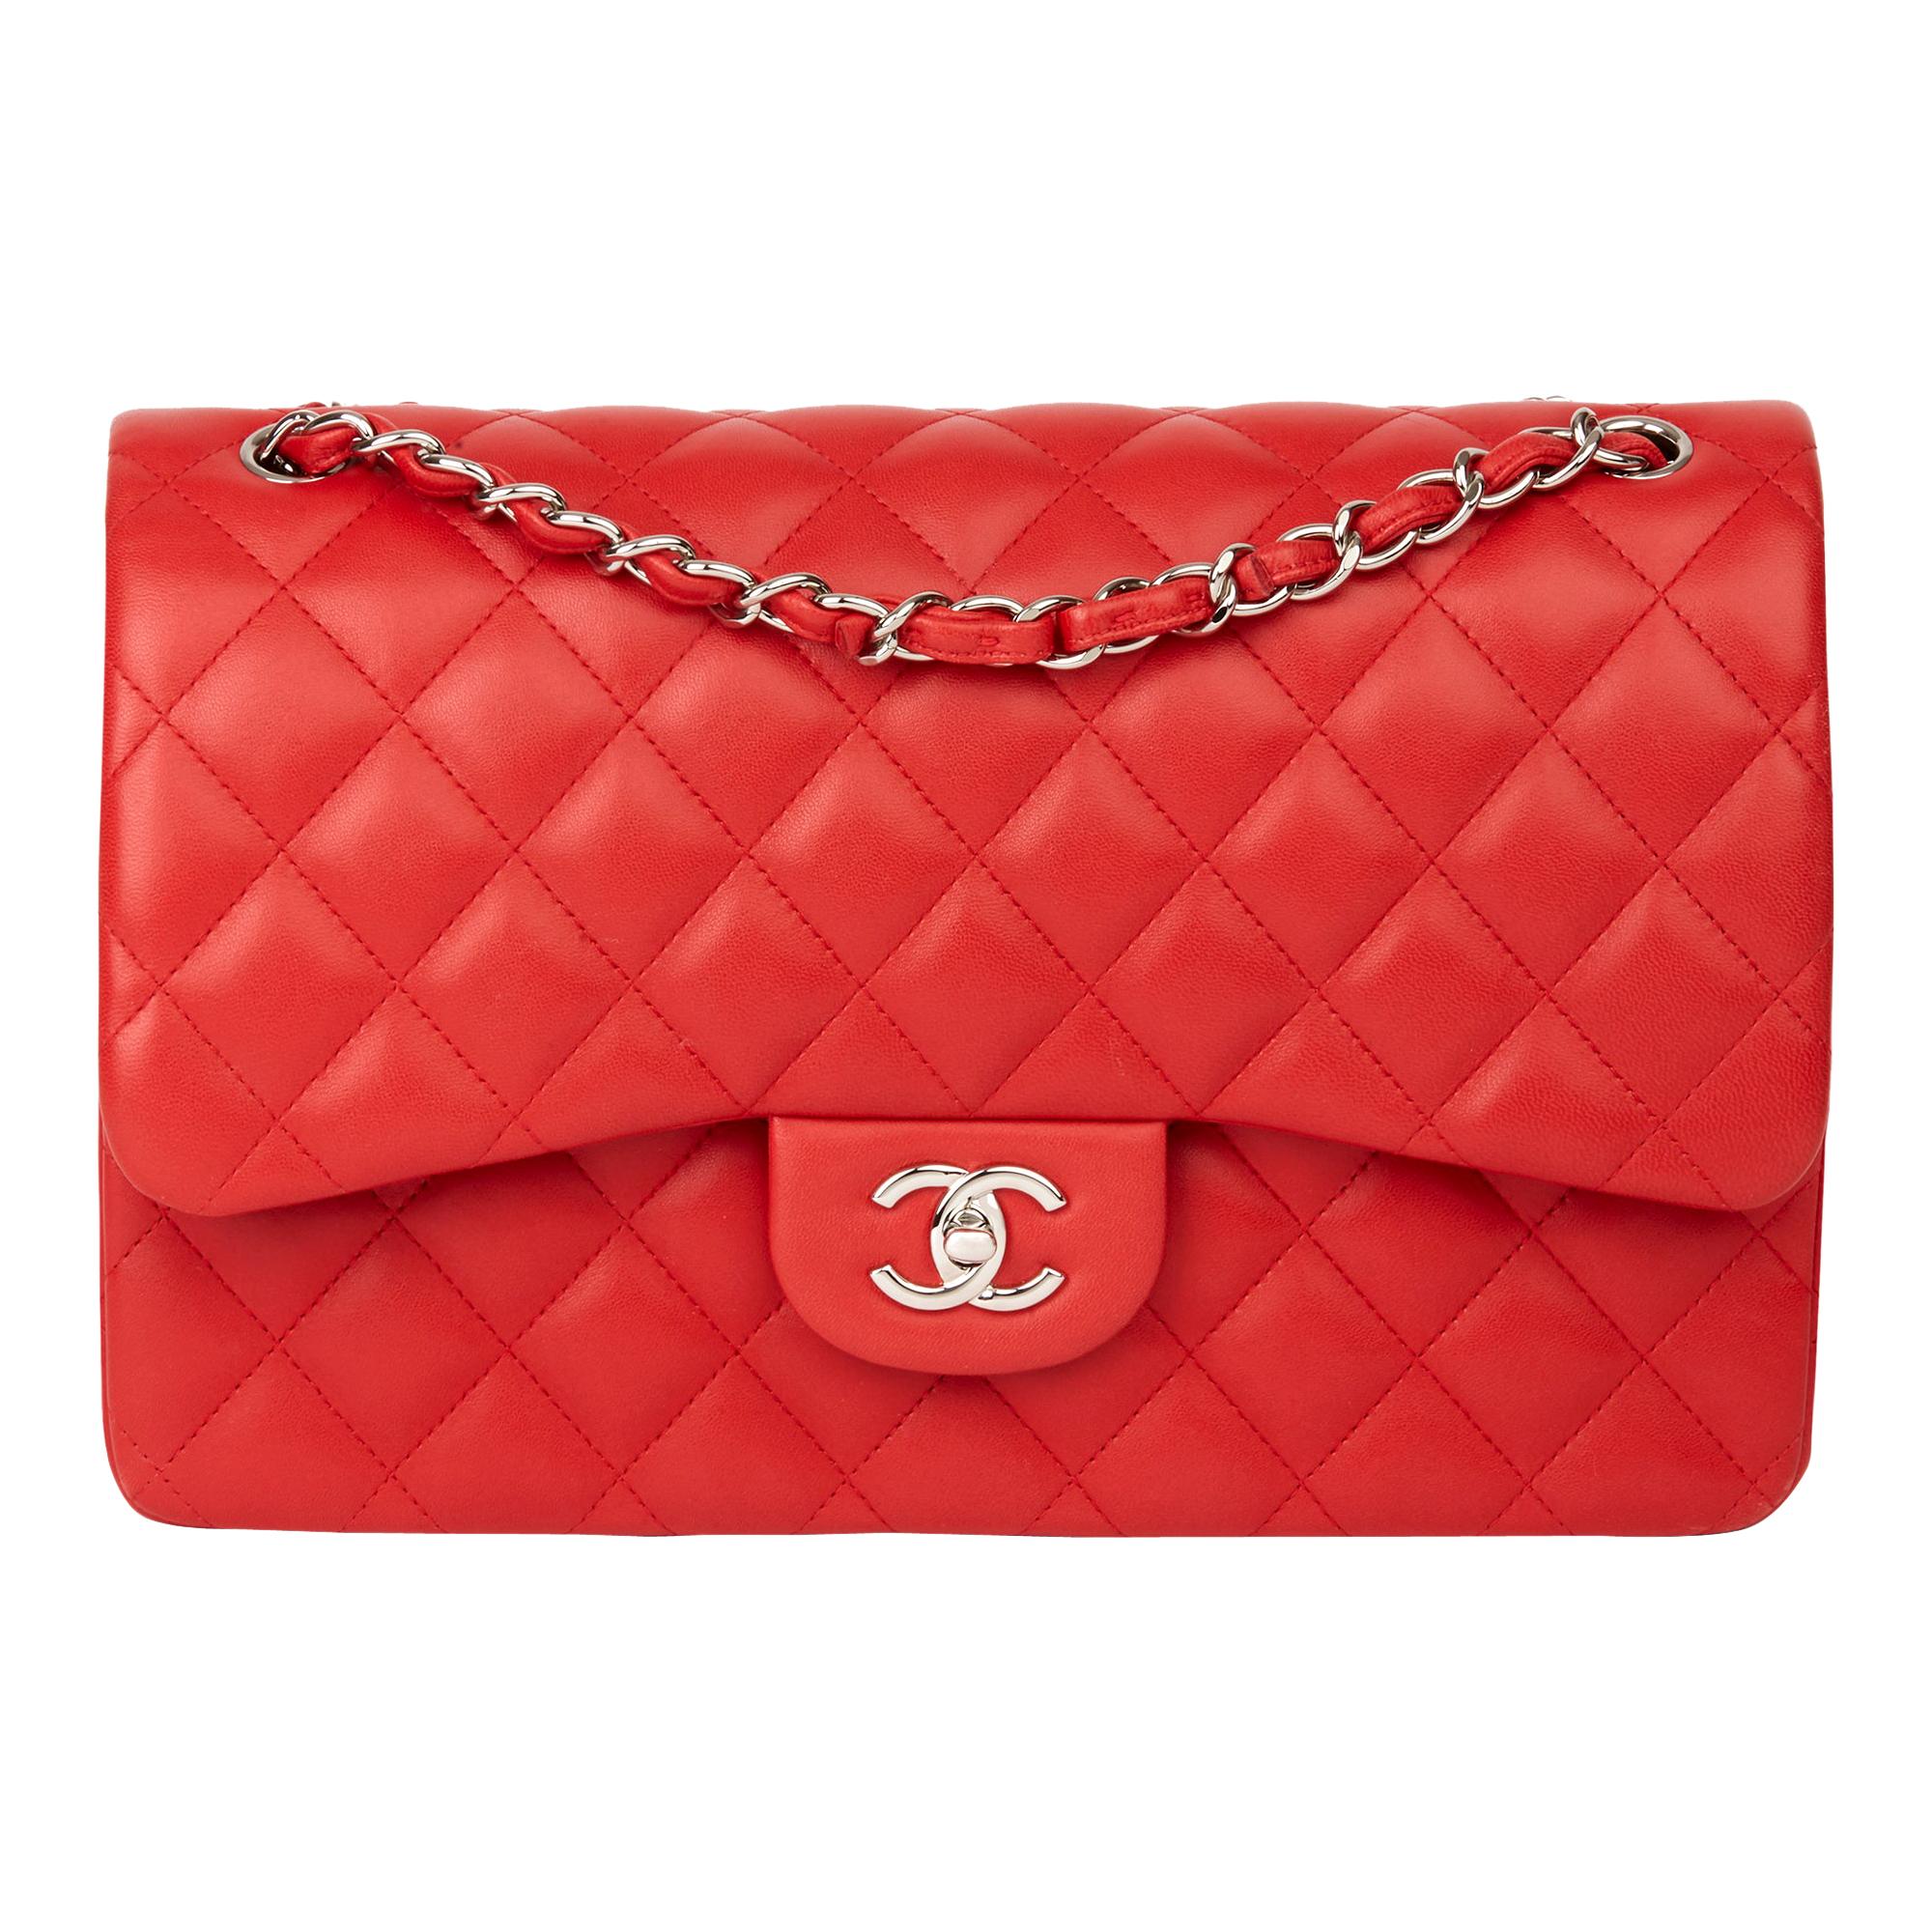 2014 Chanel Red Quilted Lambskin Jumbo Classic Double Flap Bag